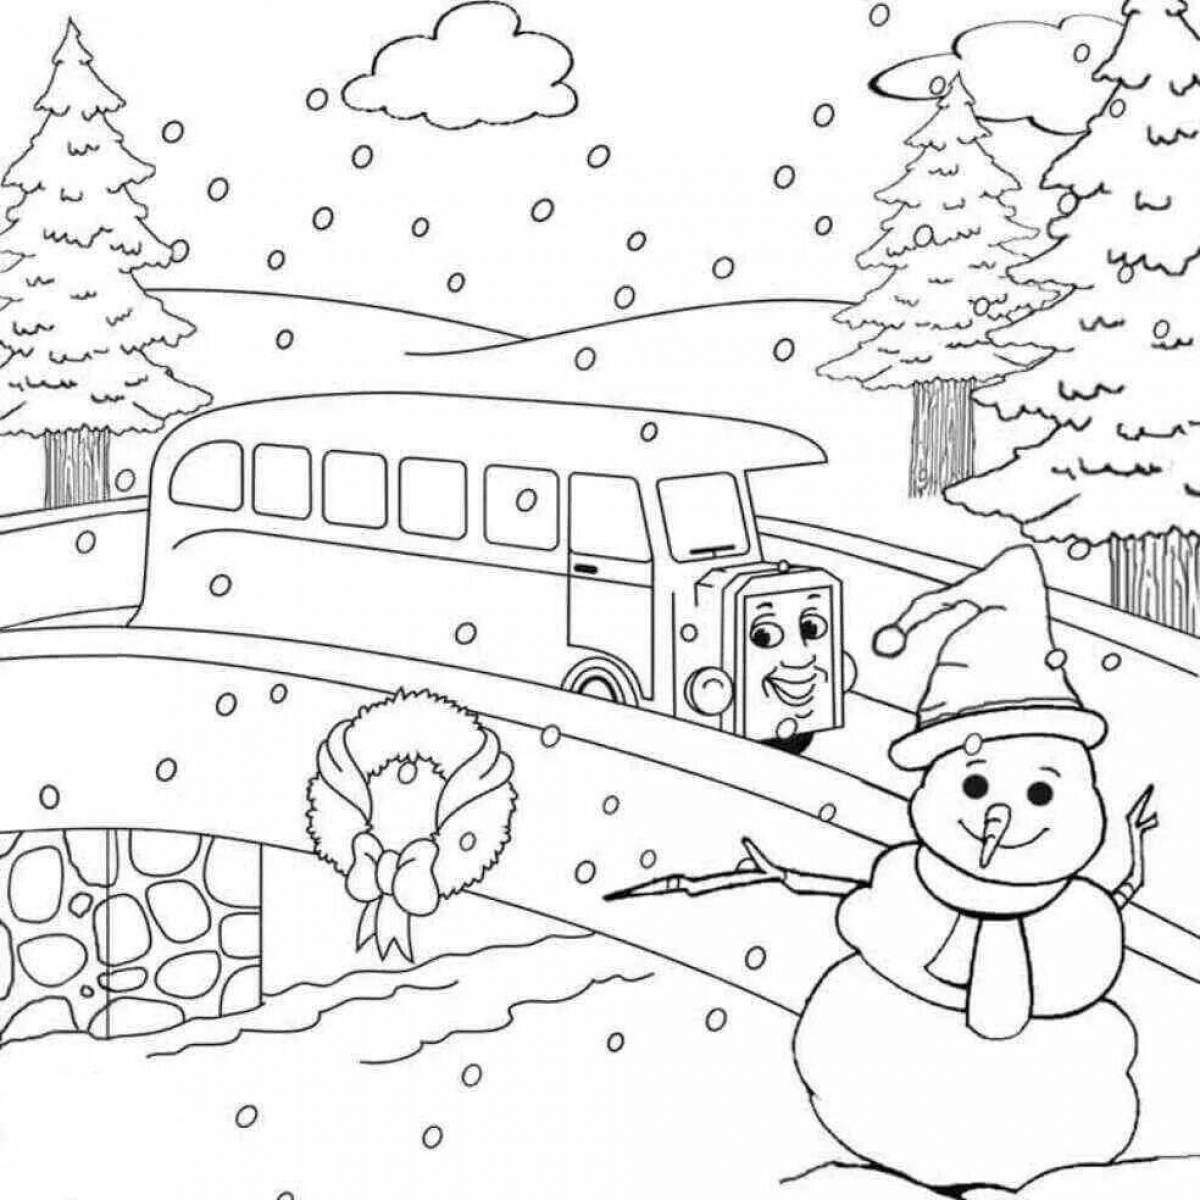 Luminous coloring pages rules of the road in winter